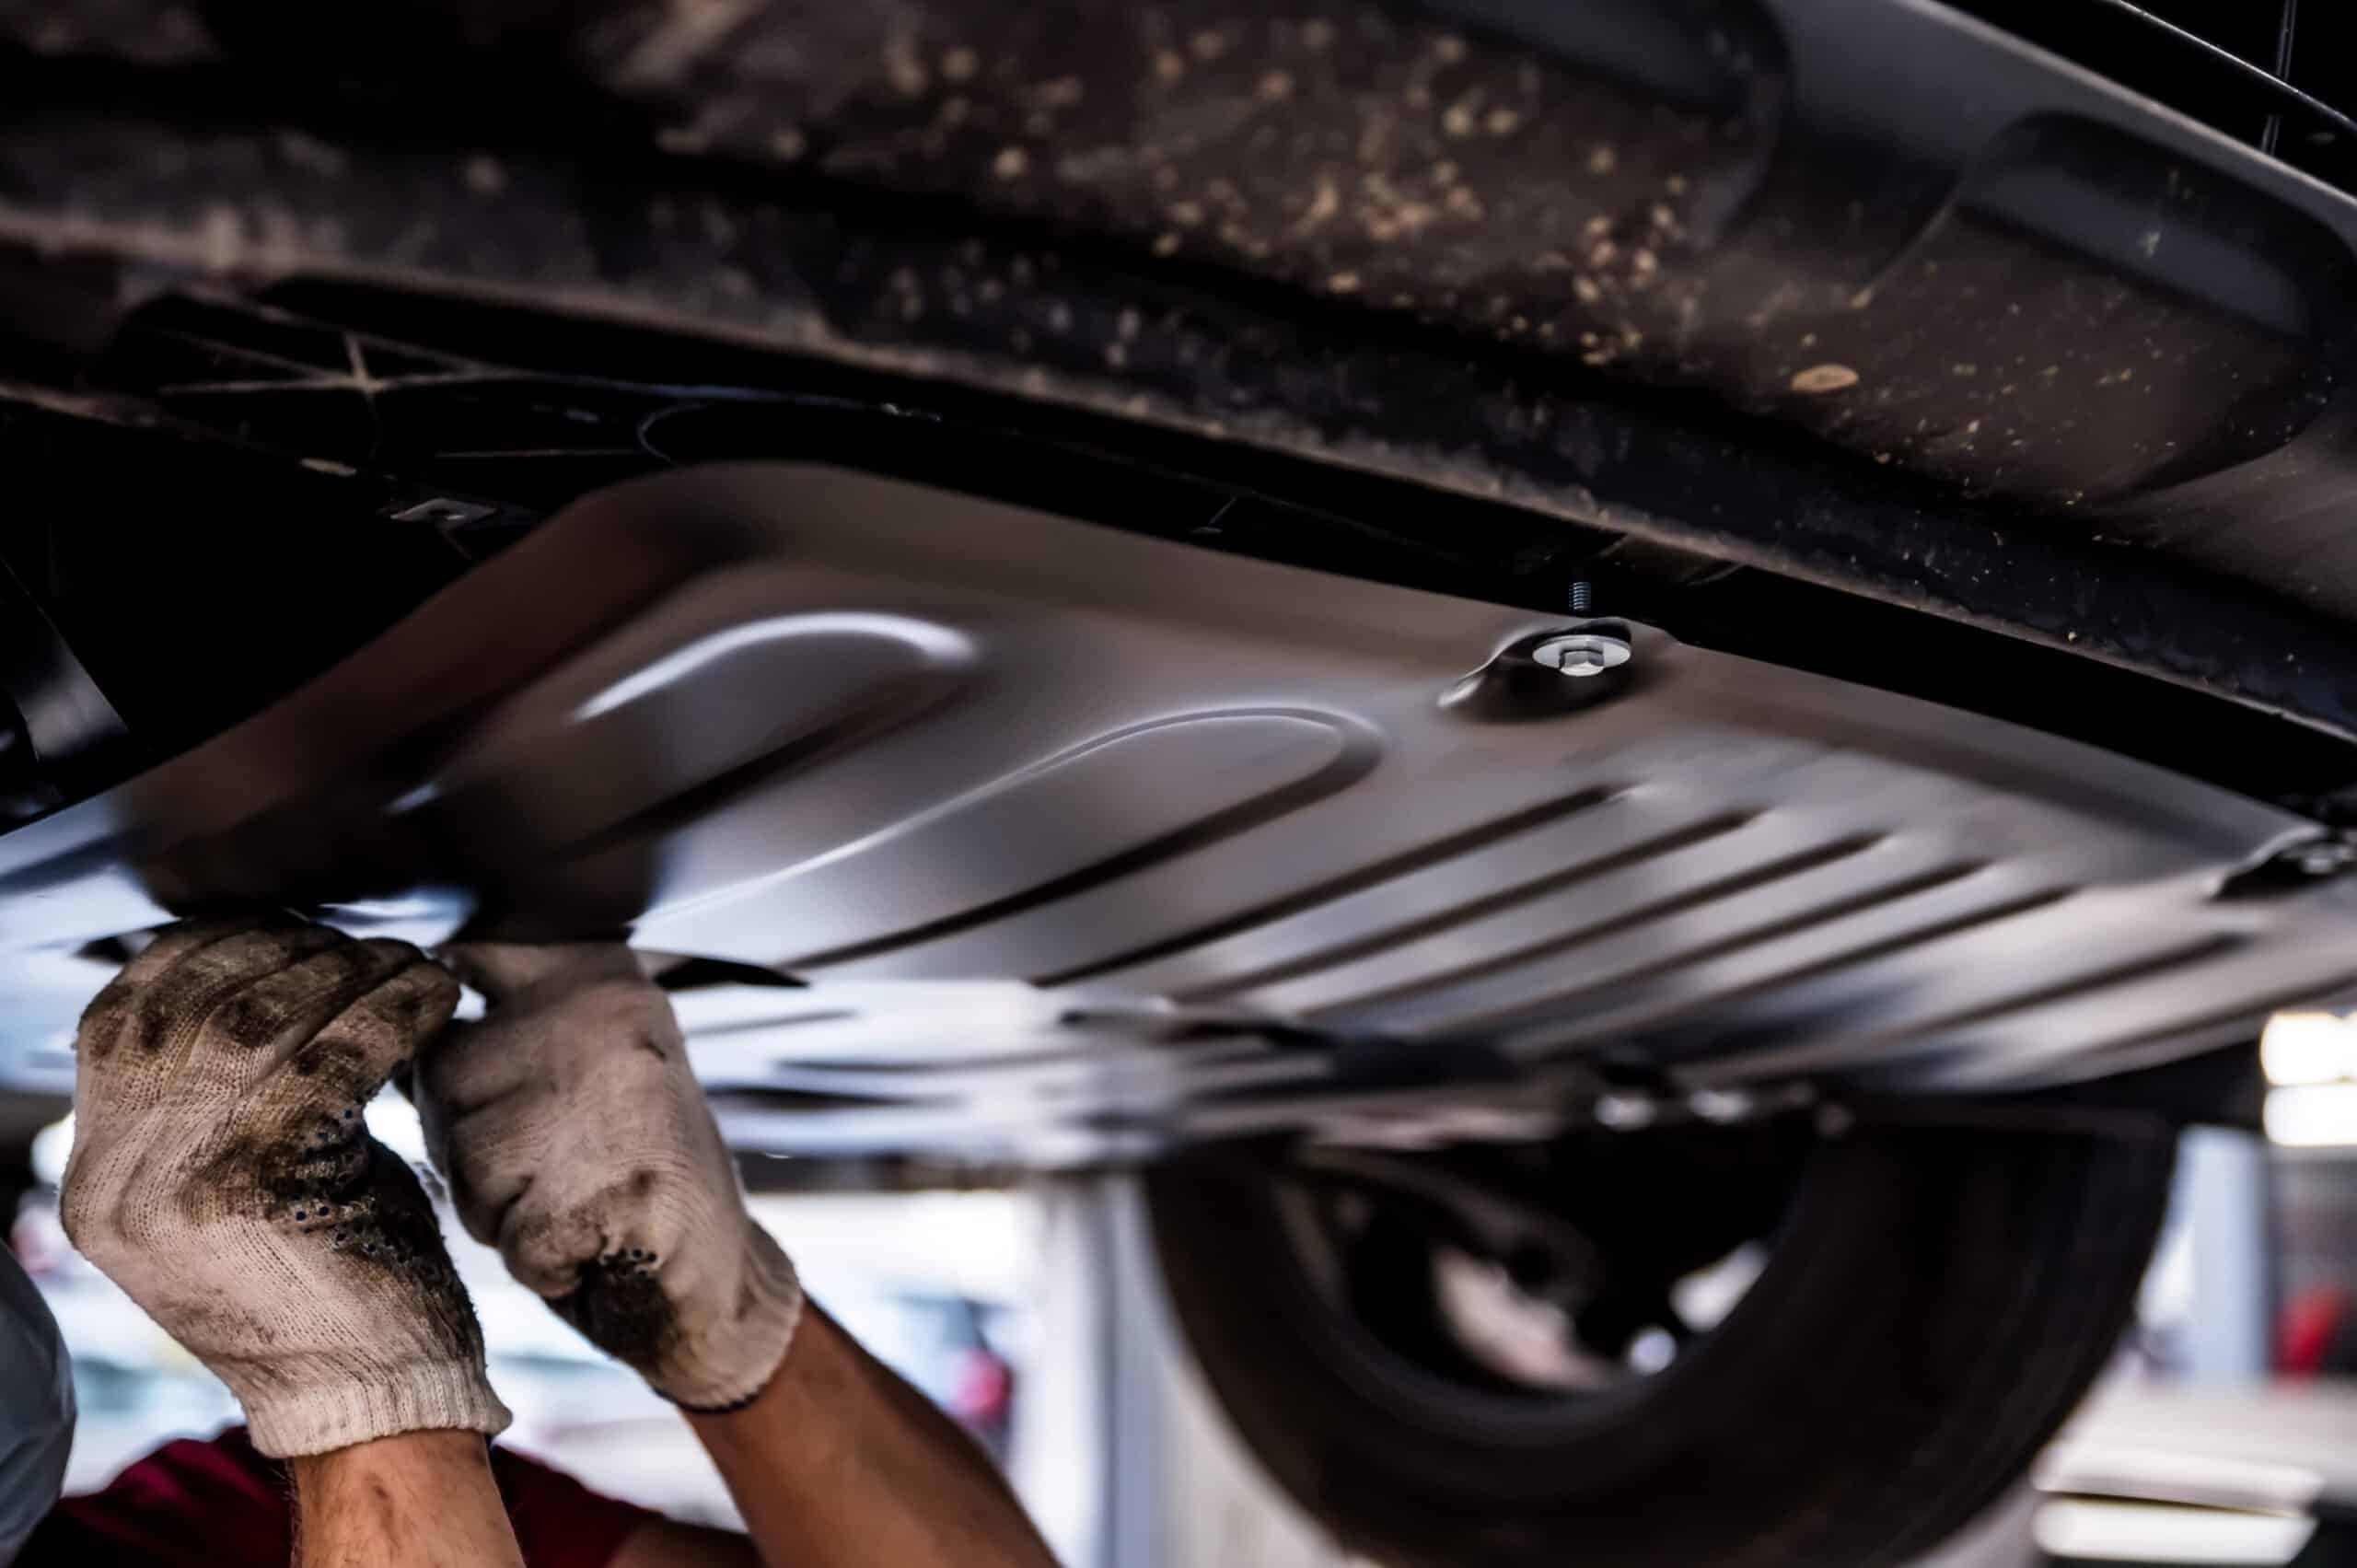 Car Undercoatings to Protect Your Vehicle Mechanic installs underbody protection on a car raised on car lift